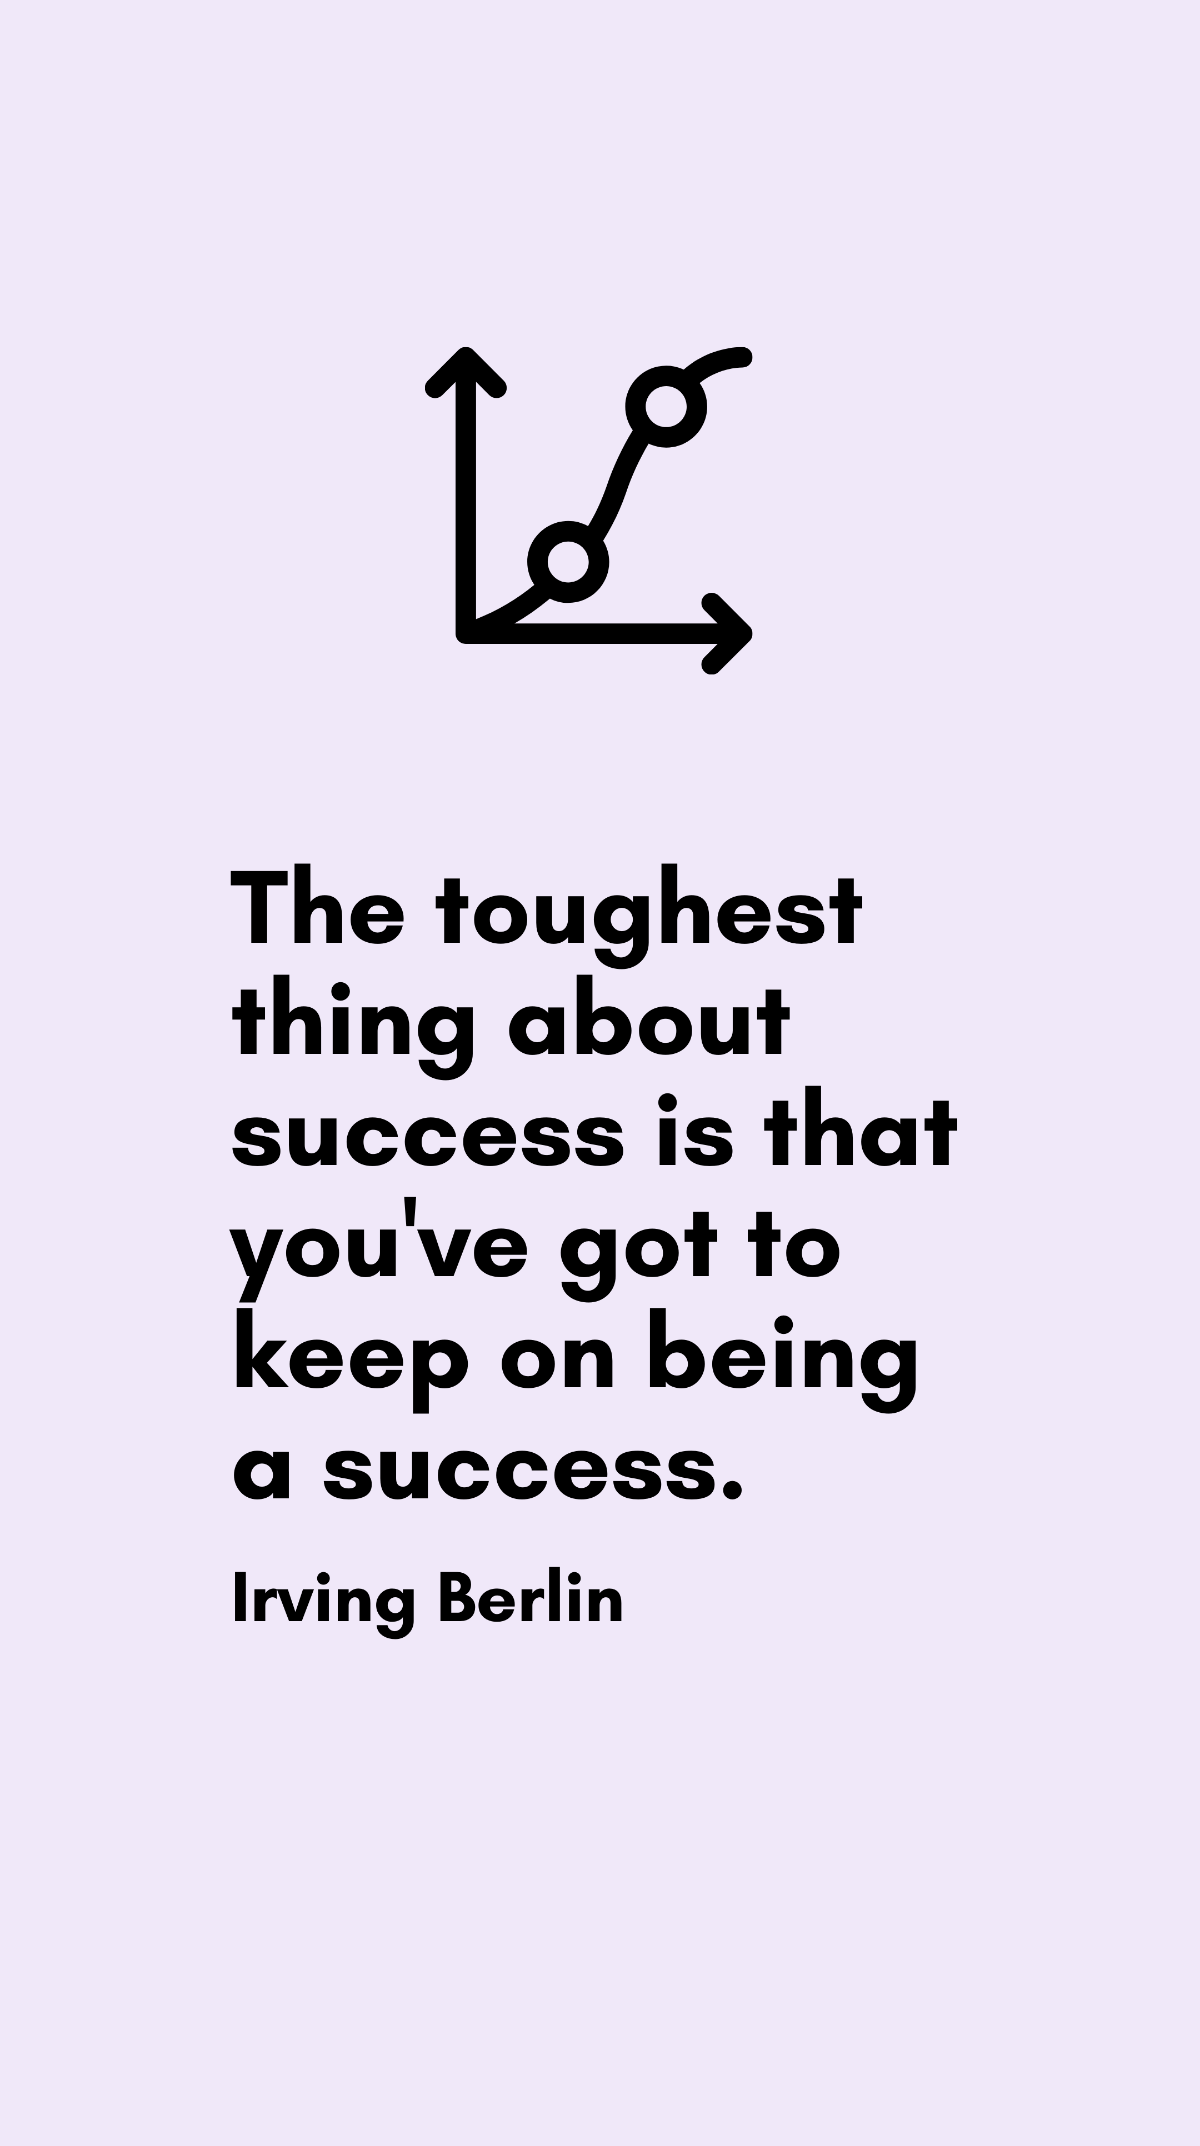 Irving Berlin - The toughest thing about success is that you've got to keep on being a success. Template